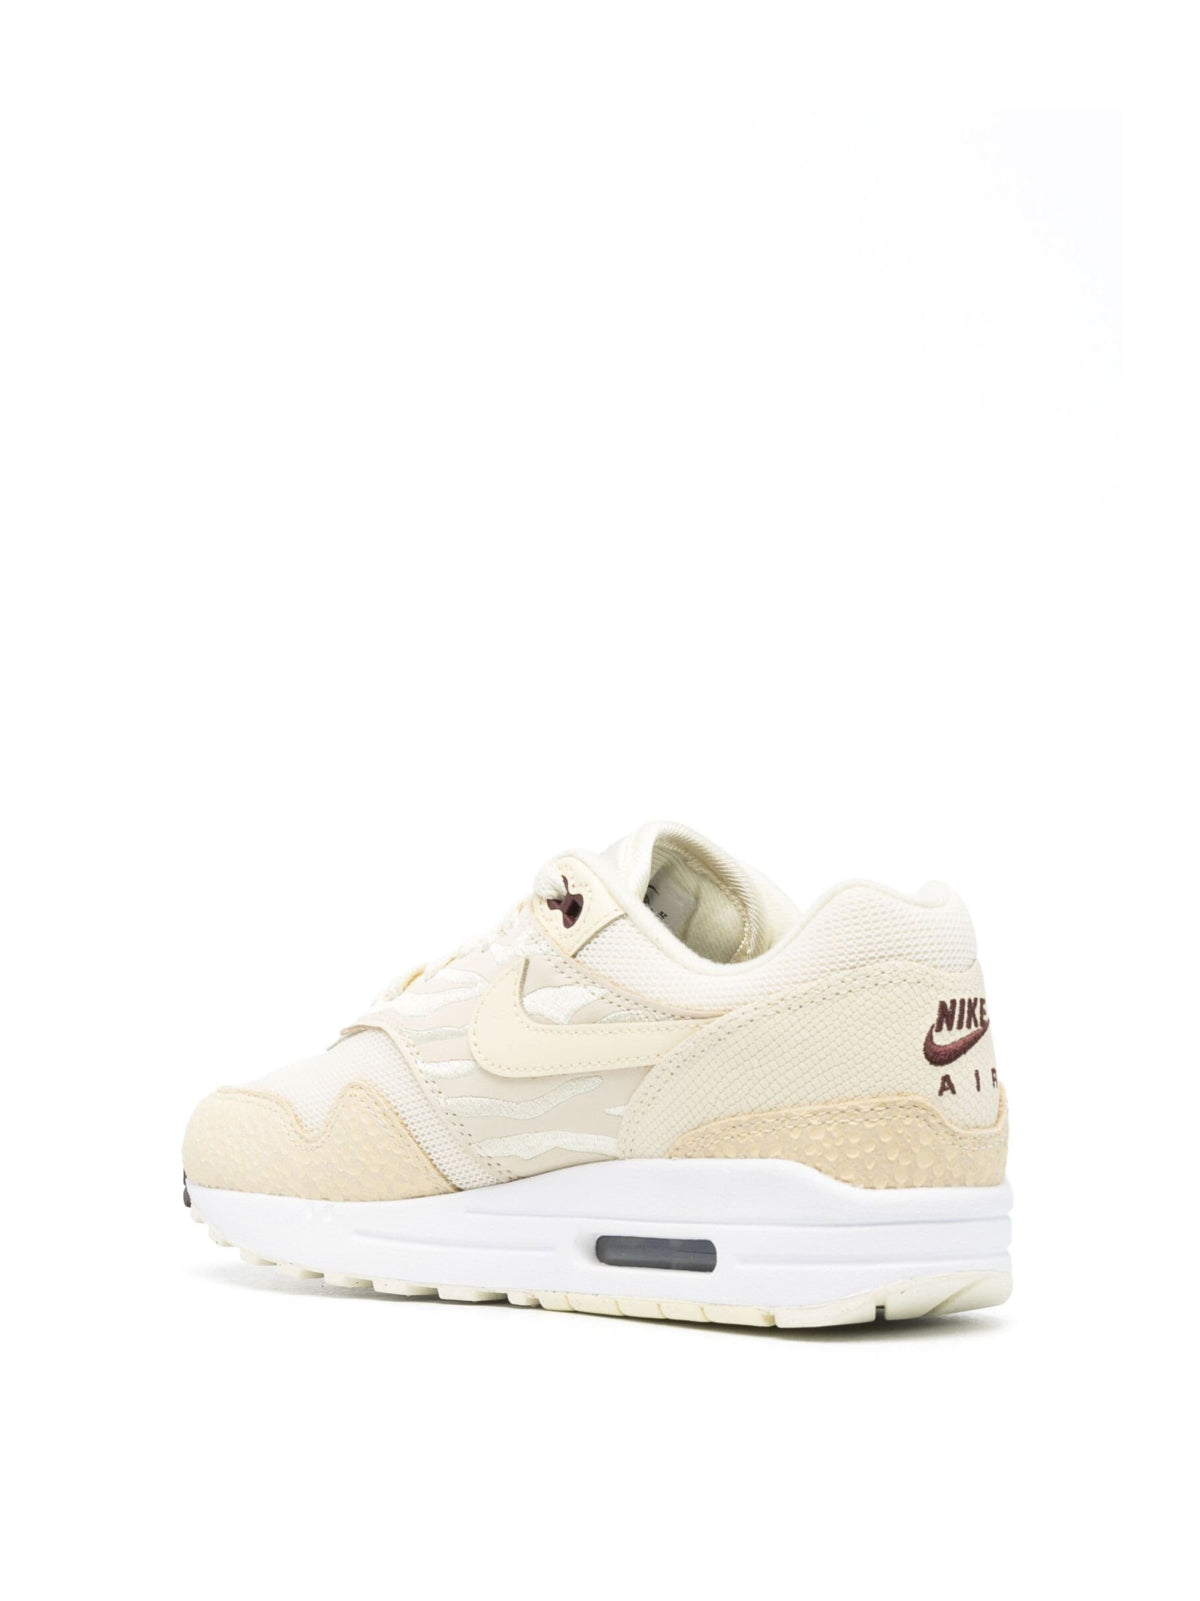 Nike-OUTLET-SALE-Air Max 1 87 Coconut Milk Sneakers-ARCHIVIST